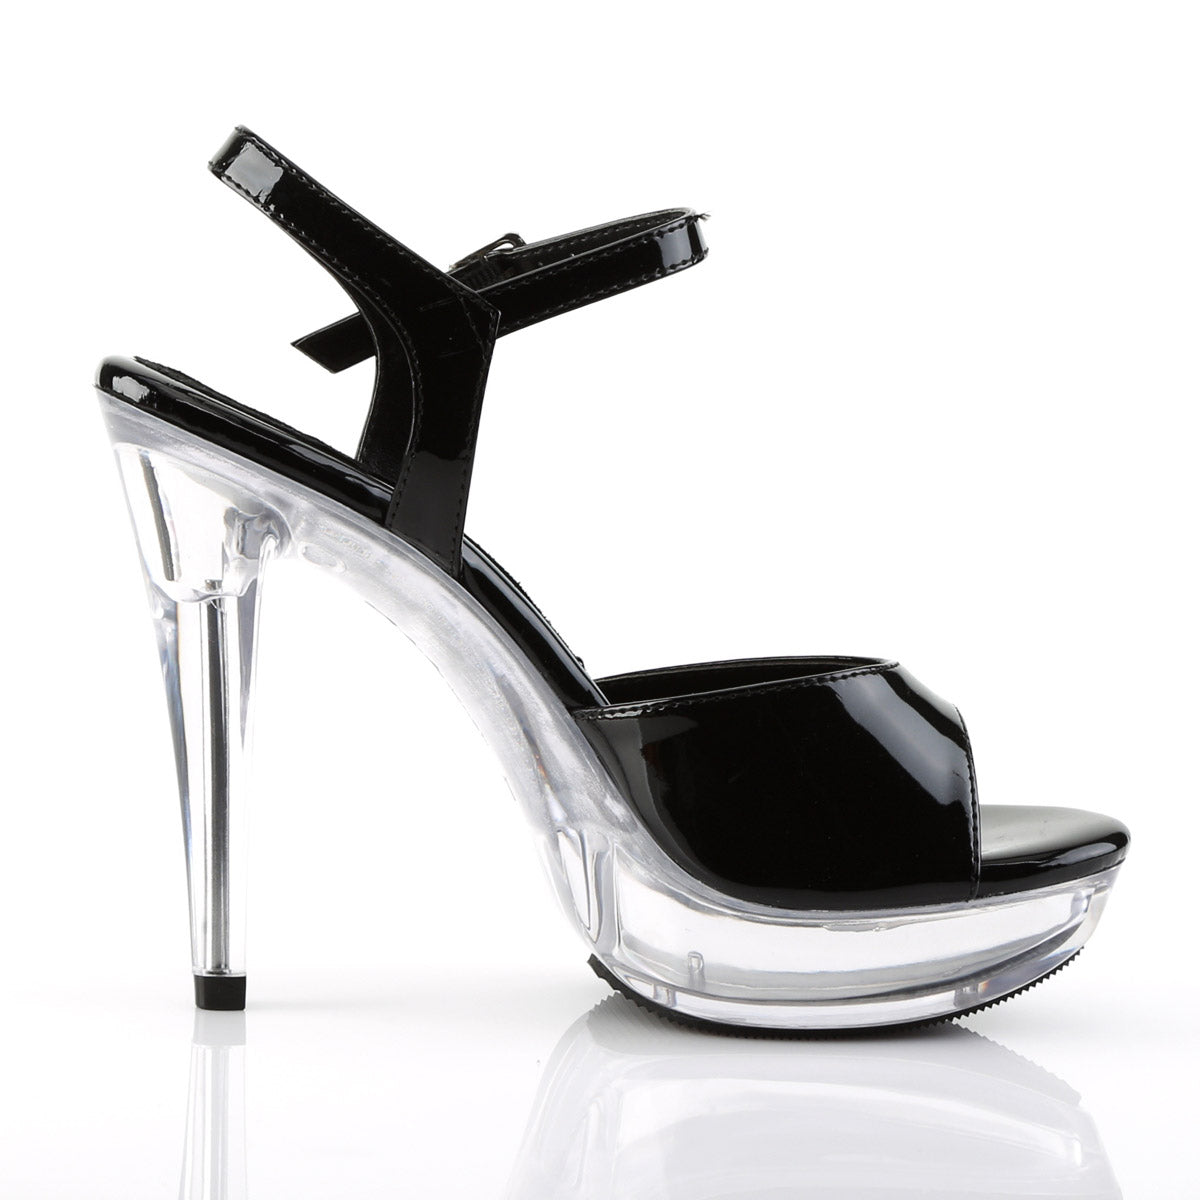 Sexy Platform Stiletto Peep Toe Ankle Strap Sandals High Heels Shoes Pleaser Fabulicious COCKTAIL/509